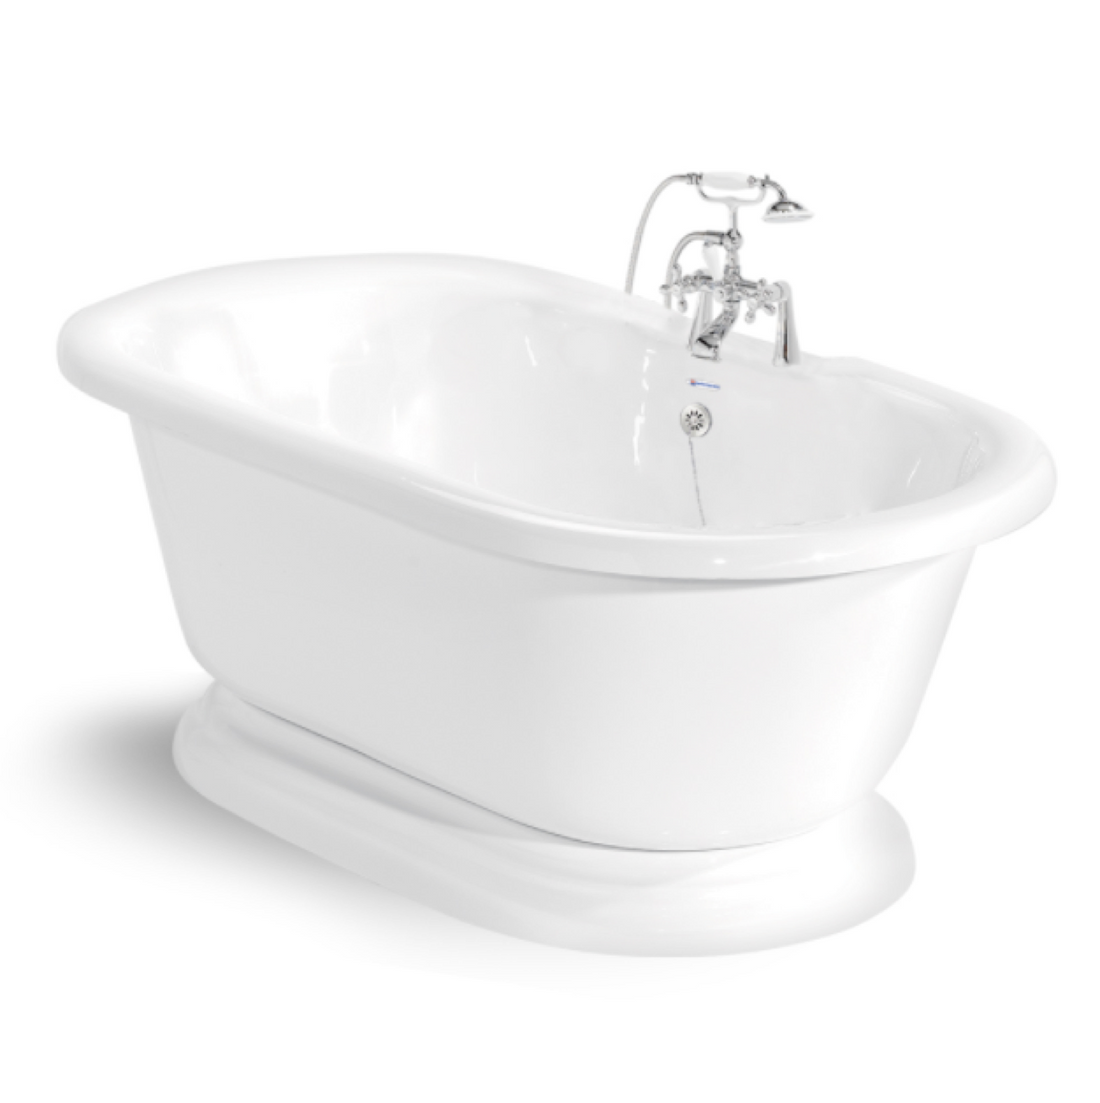 A Bathtub Matters! Tips on Choosing the Right One.